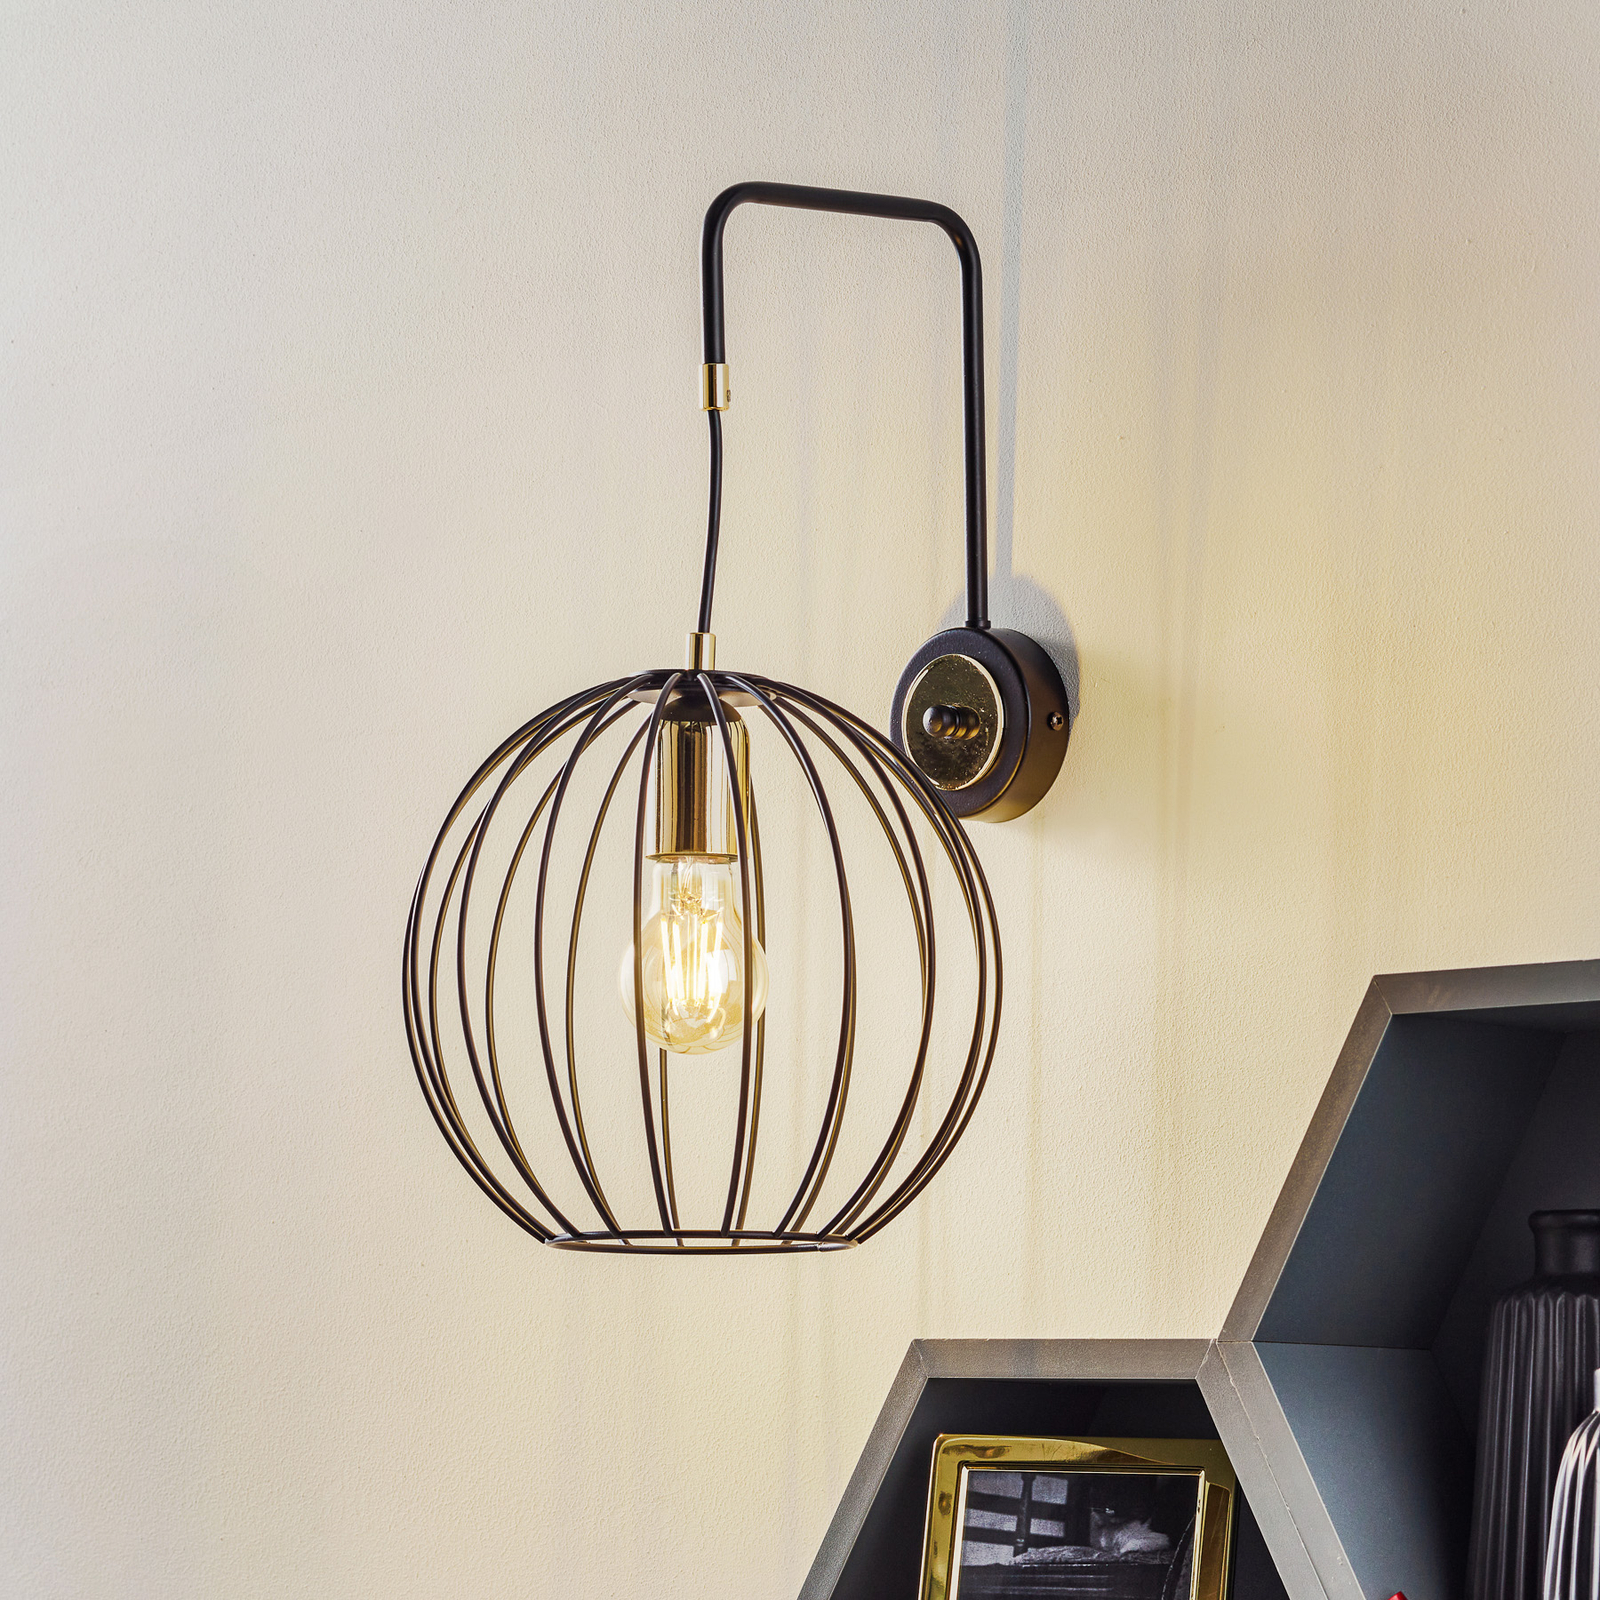 Albio K1 wall light with cage lampshade in black